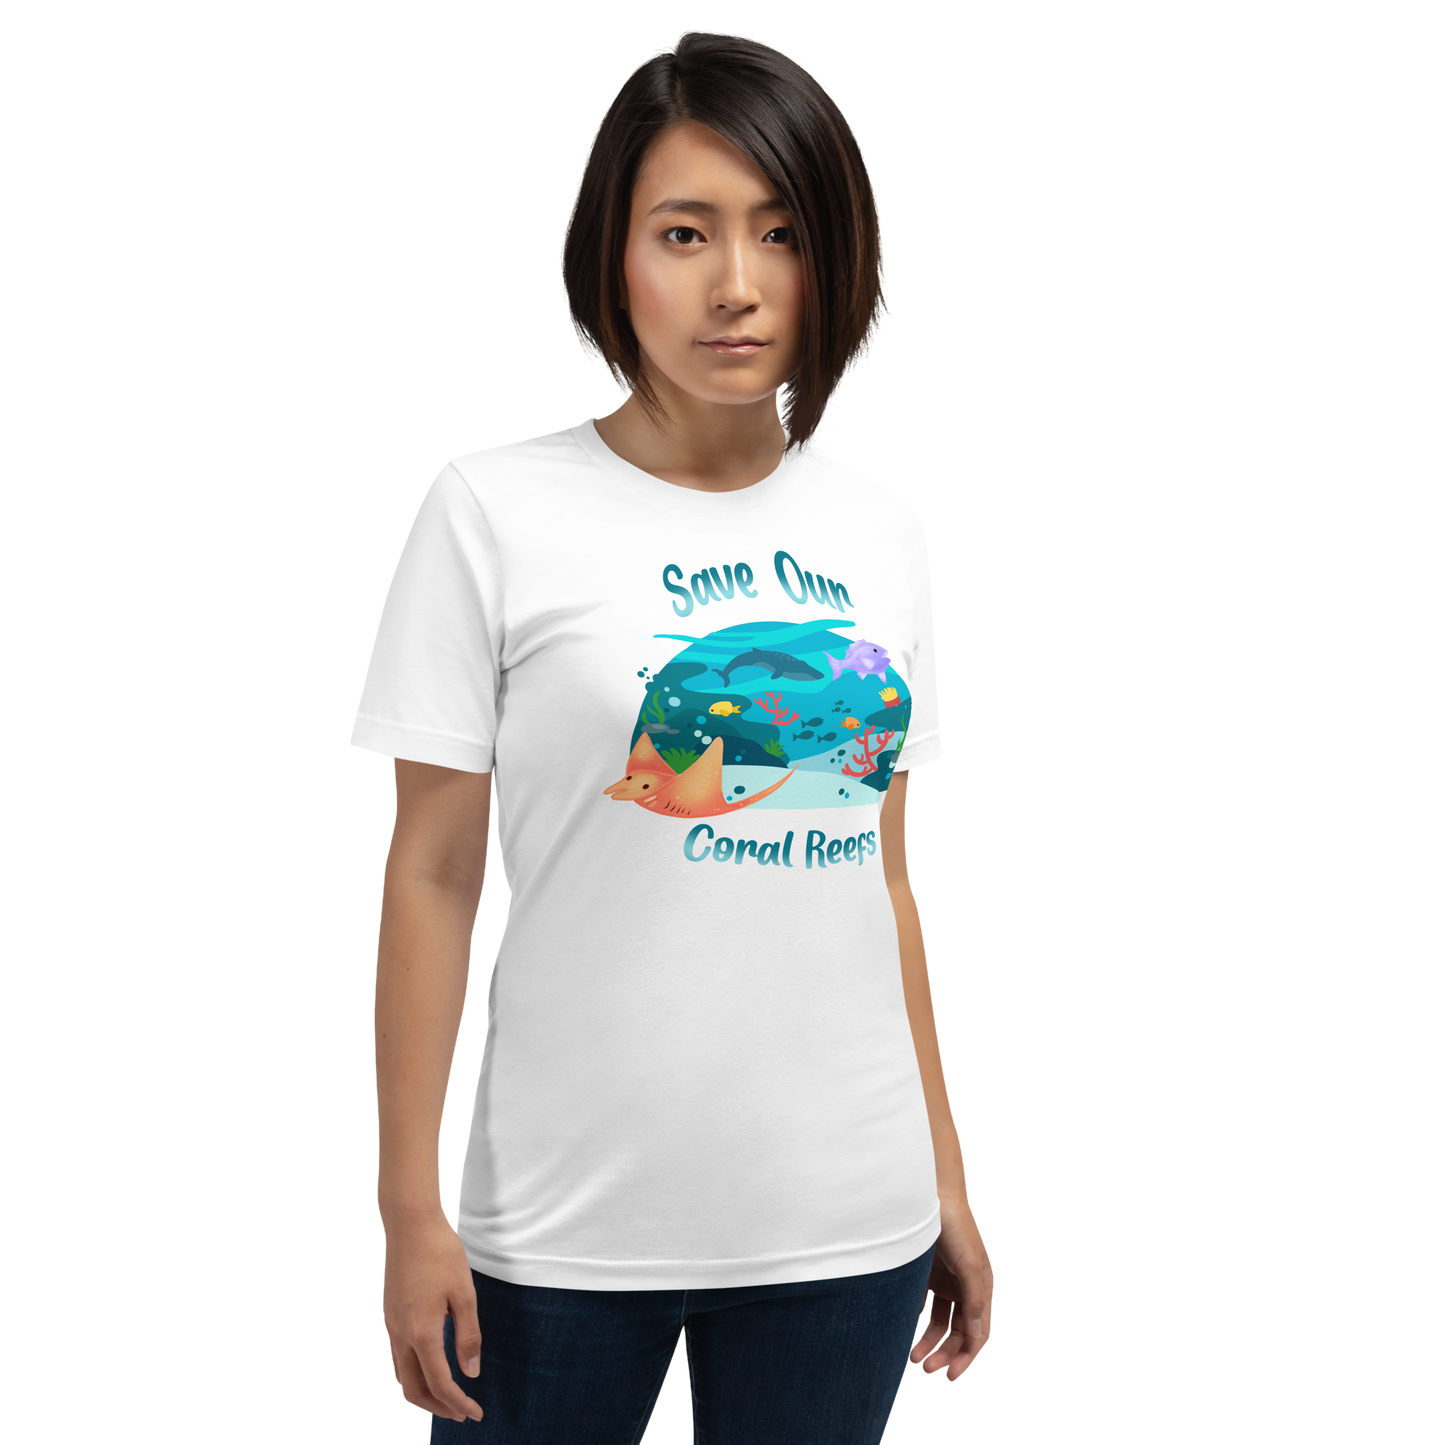 Save Our Coral Reefs T-Shirt